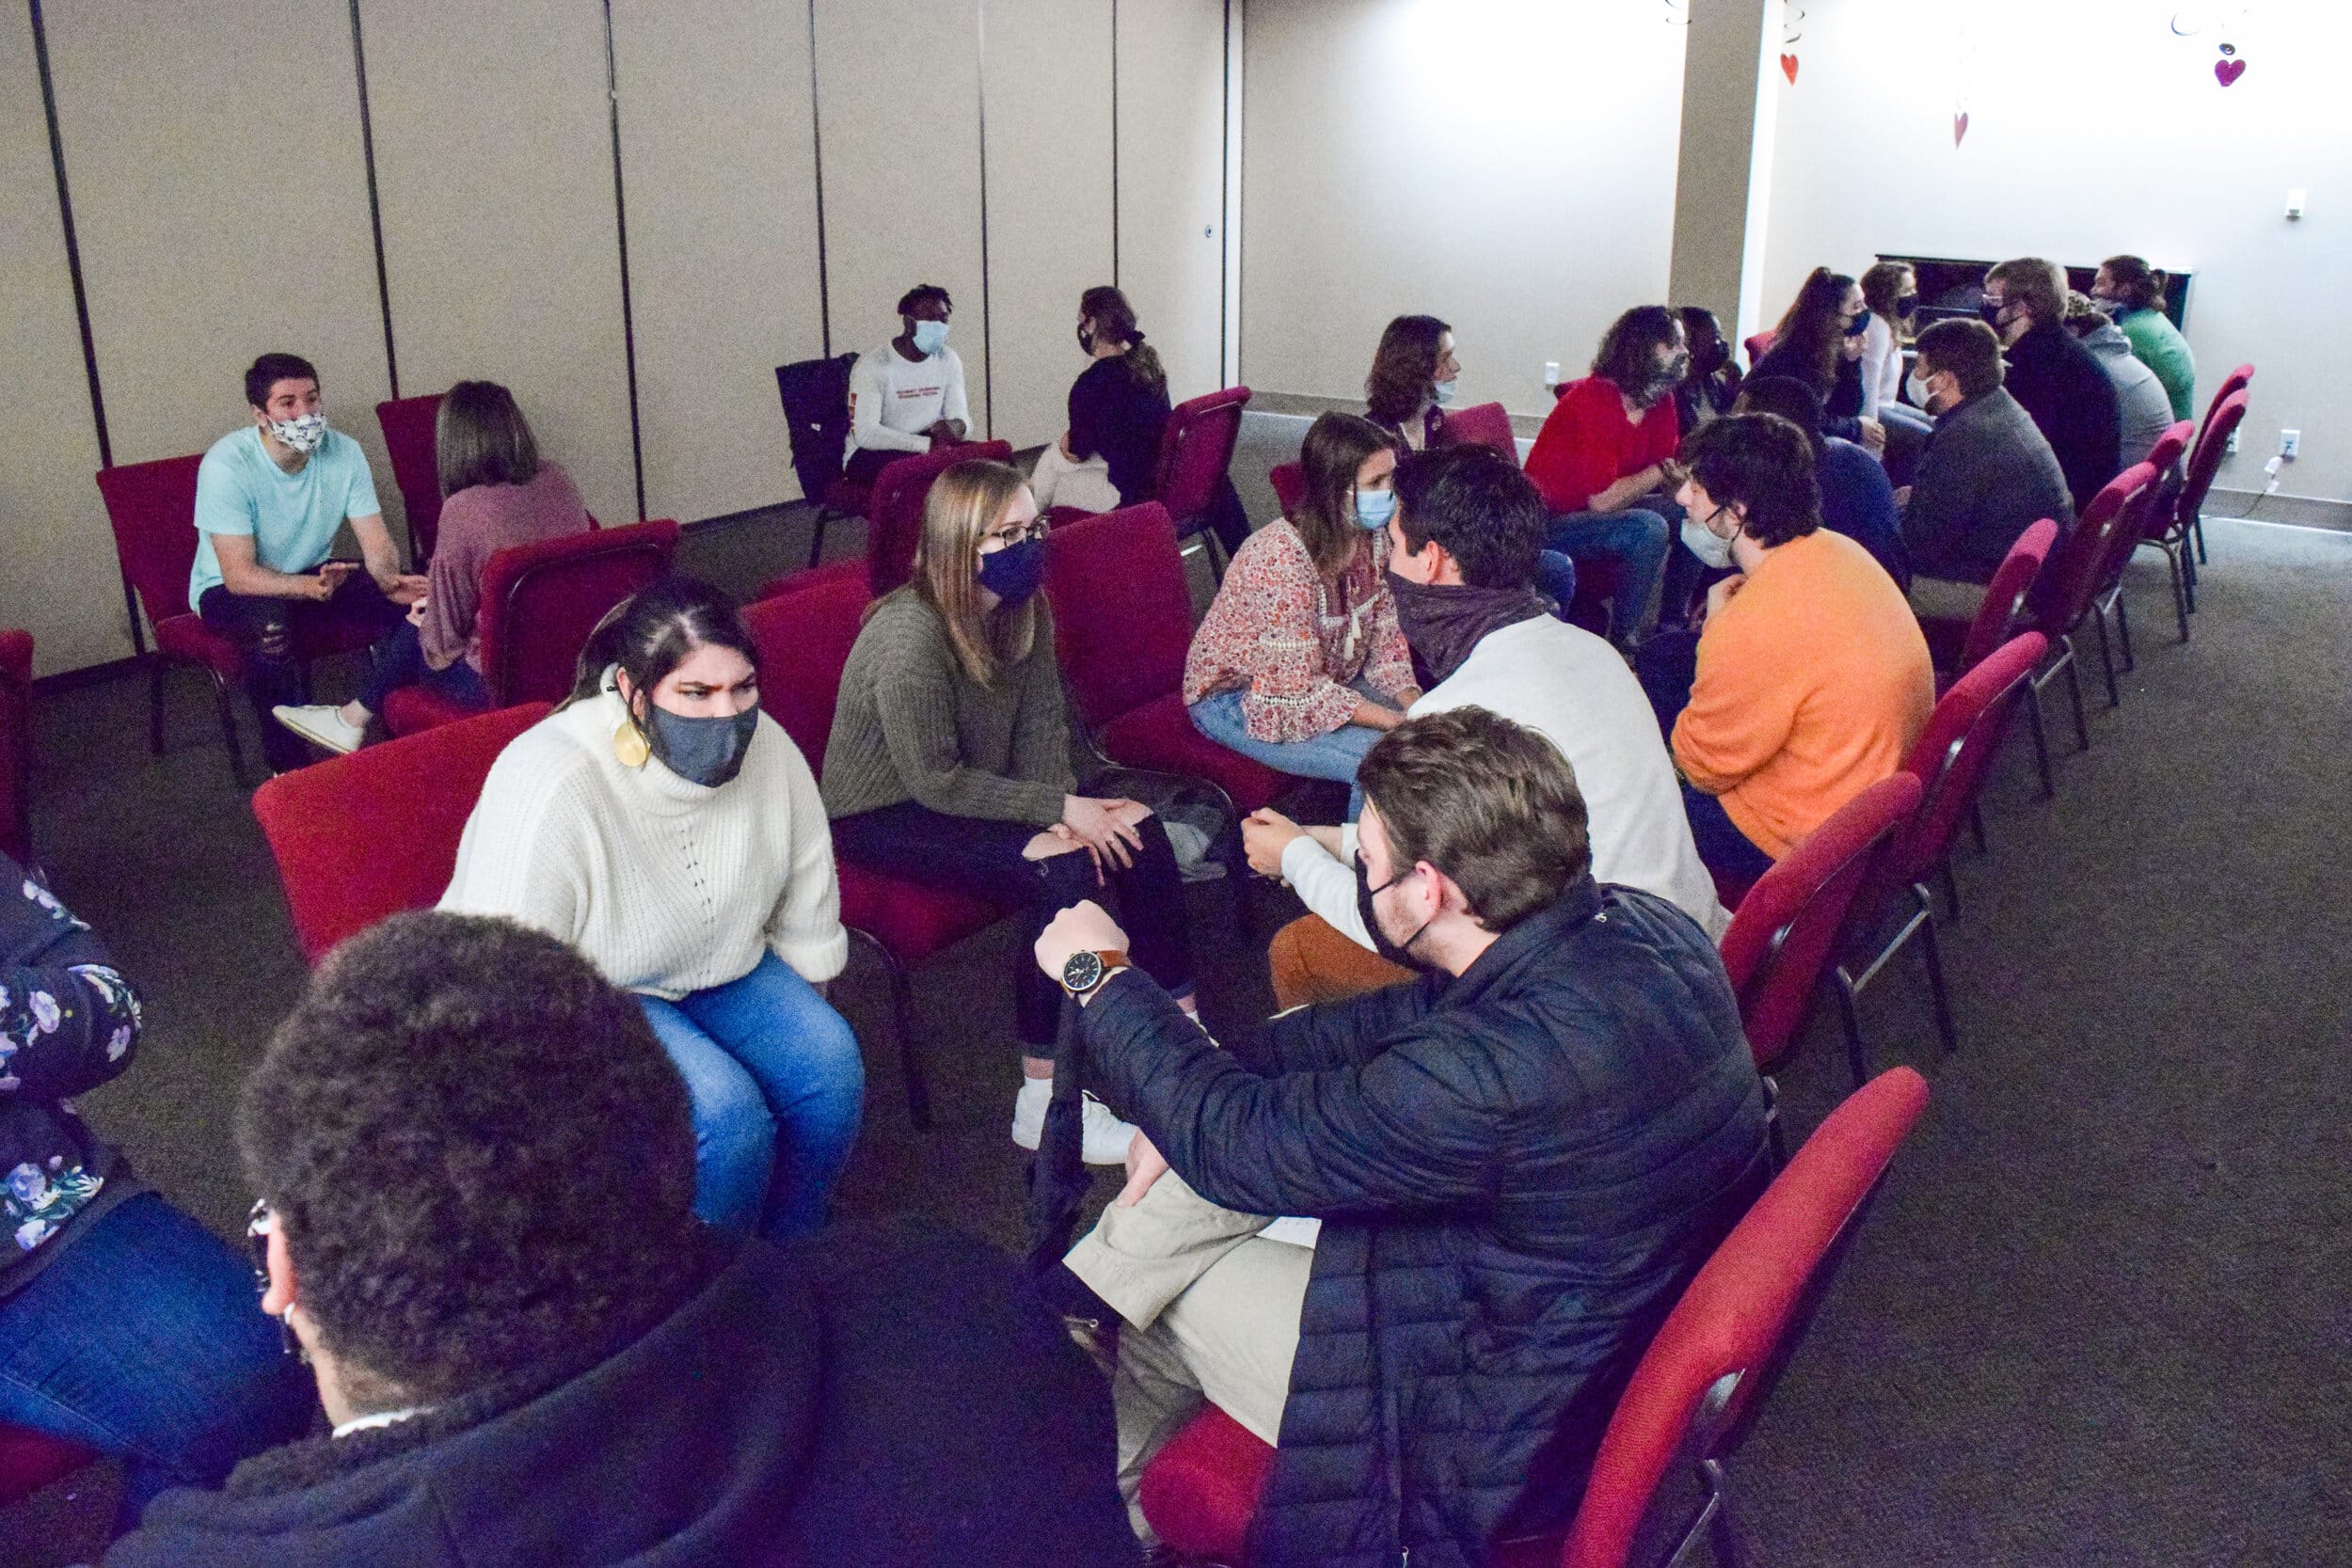 Everyone had a good time during speed dating at NGU.